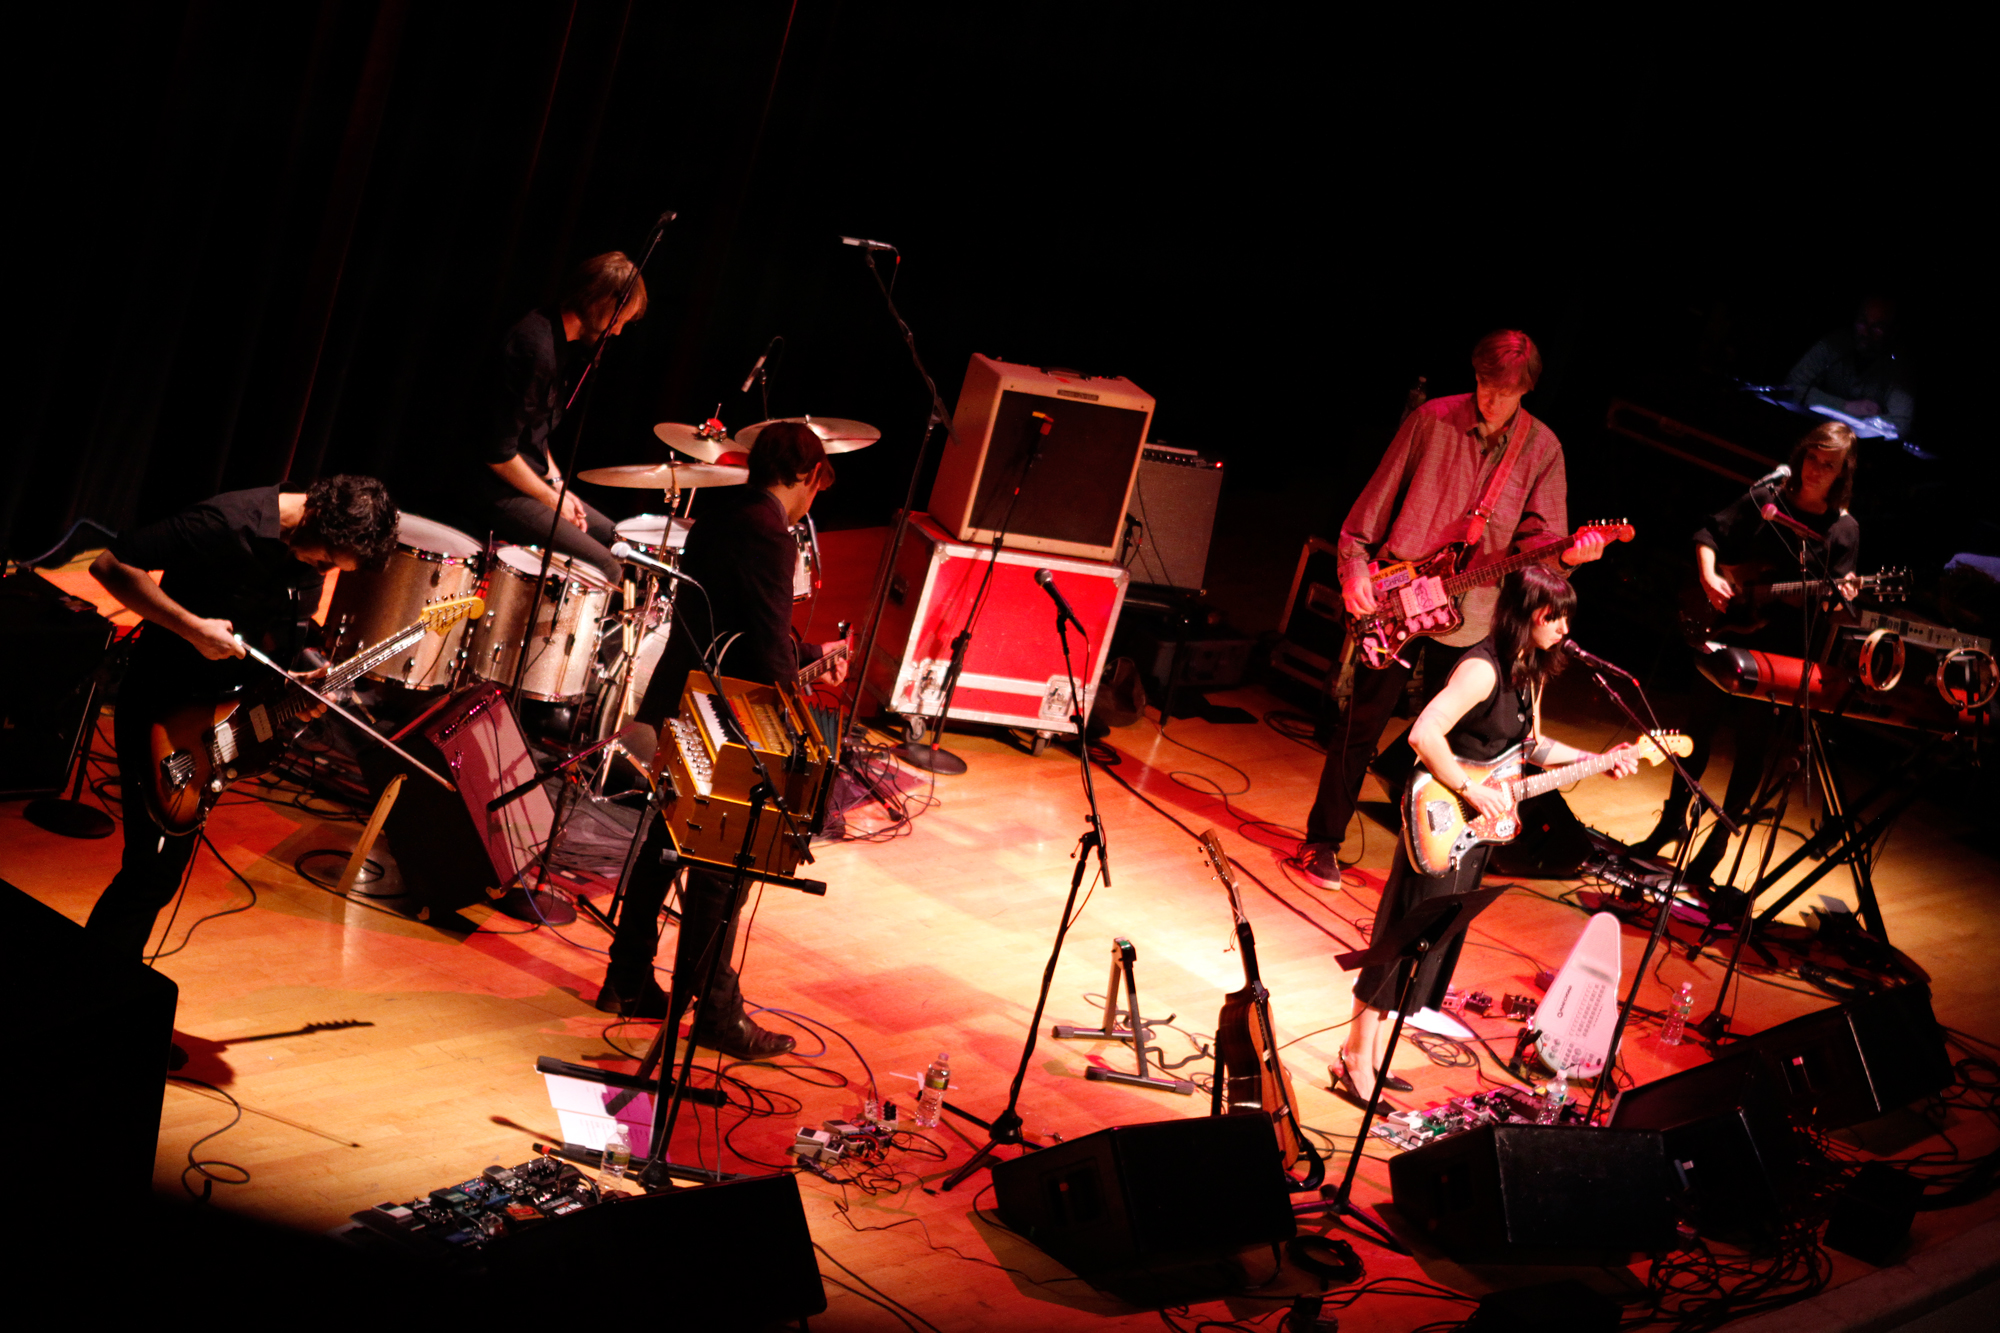 Sharon Van Etten plays with Aaron Dessner, Thurston Moore and band at Town Hall in New York, NY on Nov. 15, 2012.